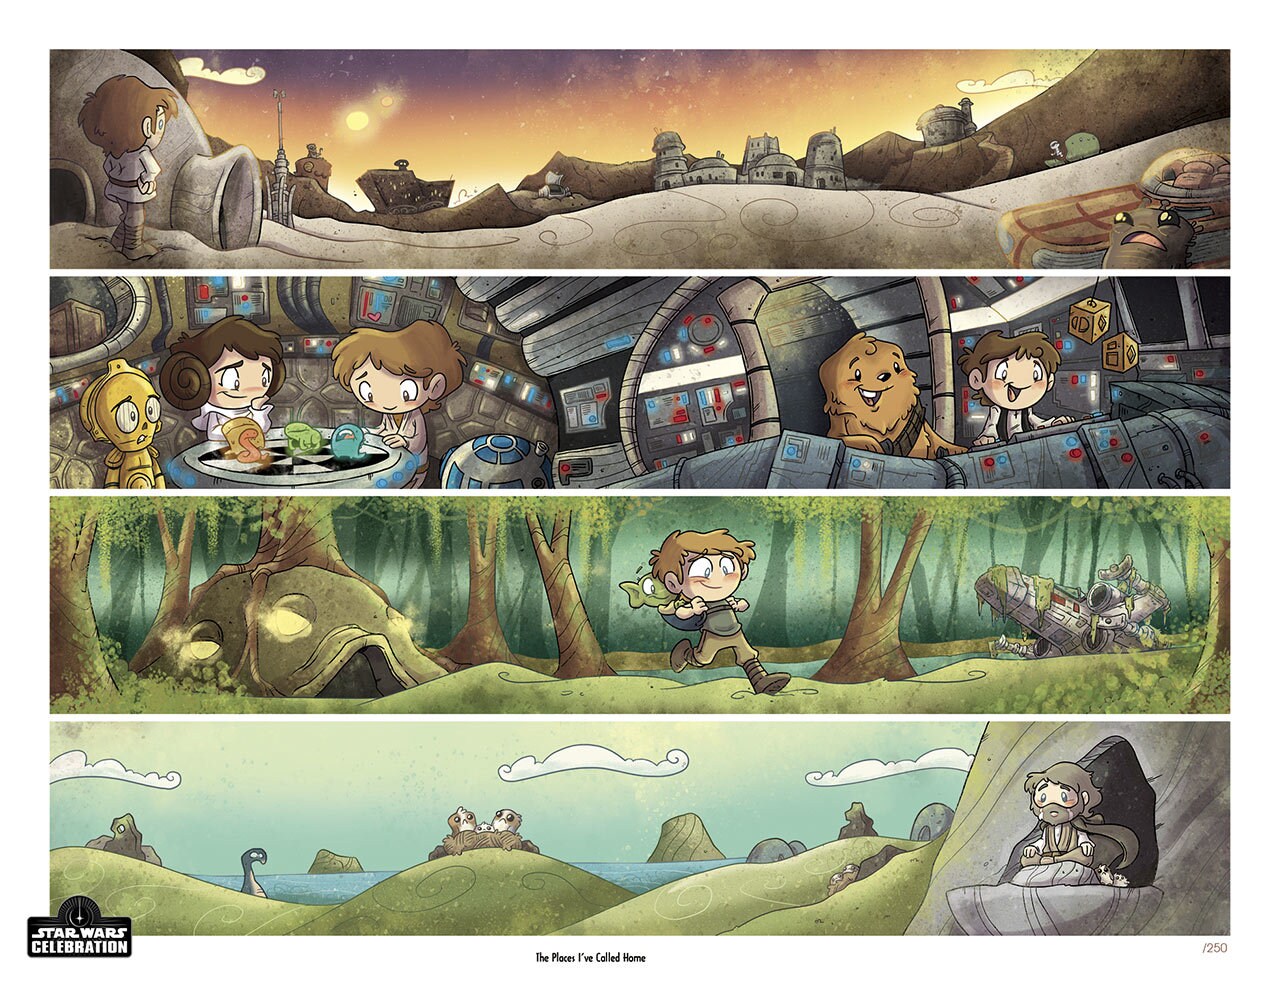 Star Wars Celebration 2020 Art Show: The Places I've Called Home